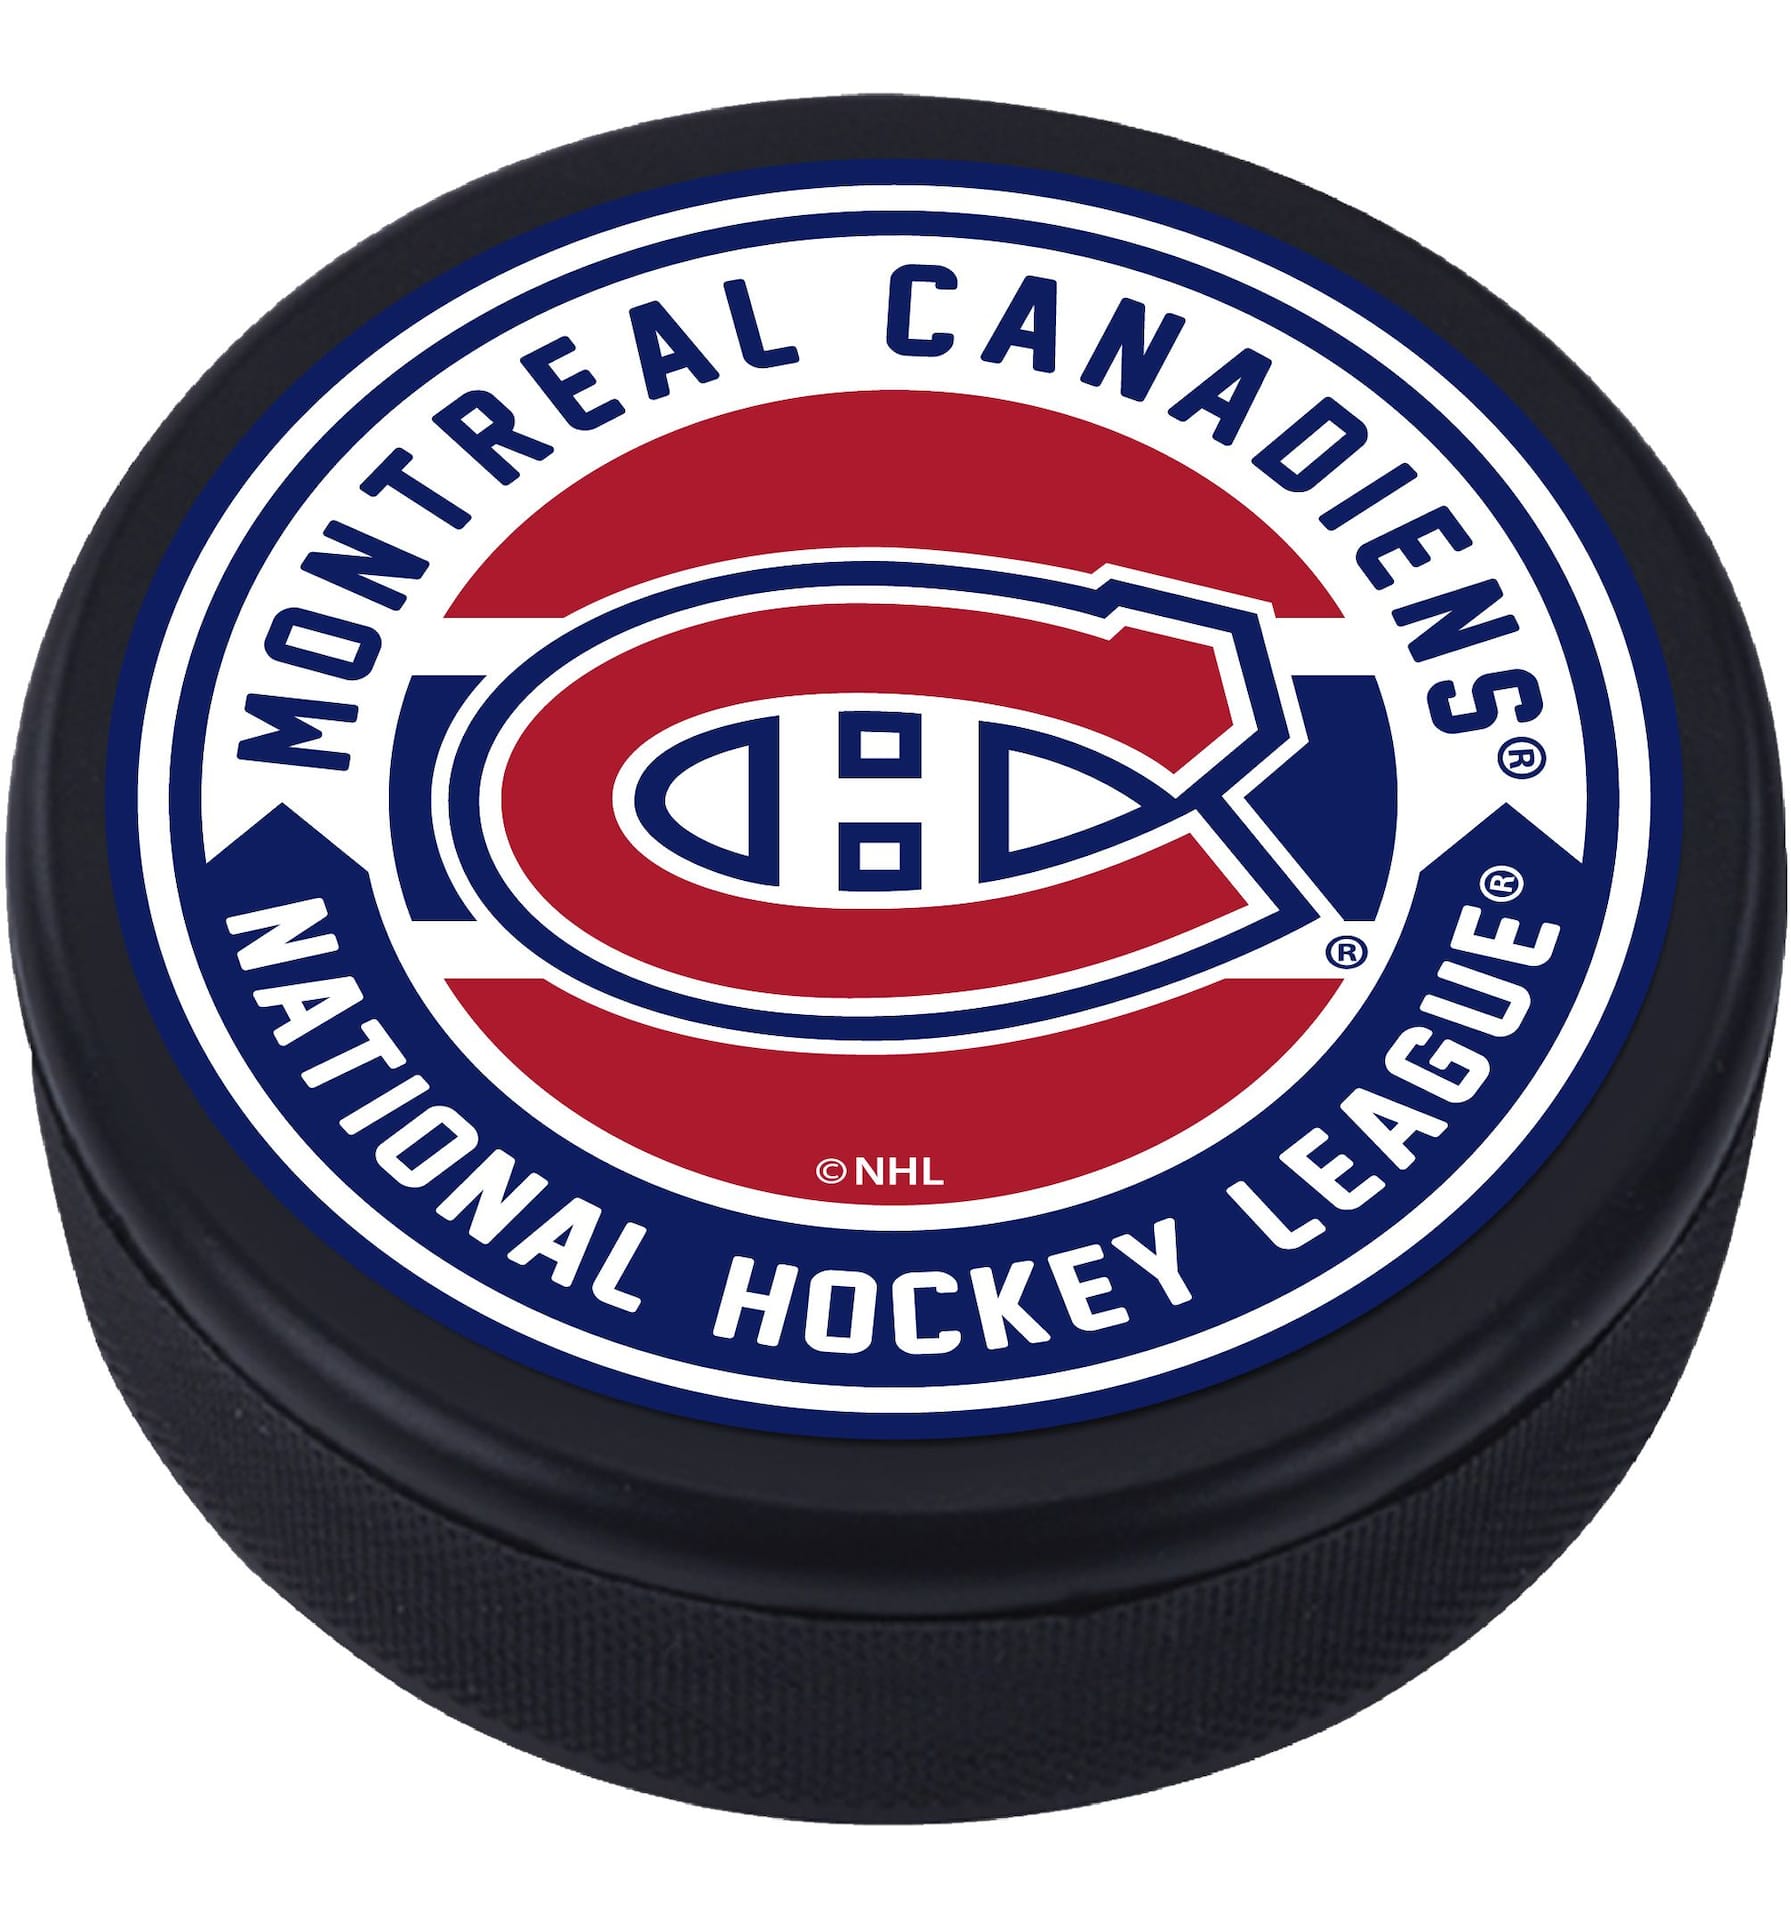 https://media-www.canadiantire.ca/product/playing/hockey/hockey-accessories/1831834/montreal-canadiens-embedded-logo-puck-351e77fa-7d17-4f56-adba-f625626c9447-jpgrendition.jpg